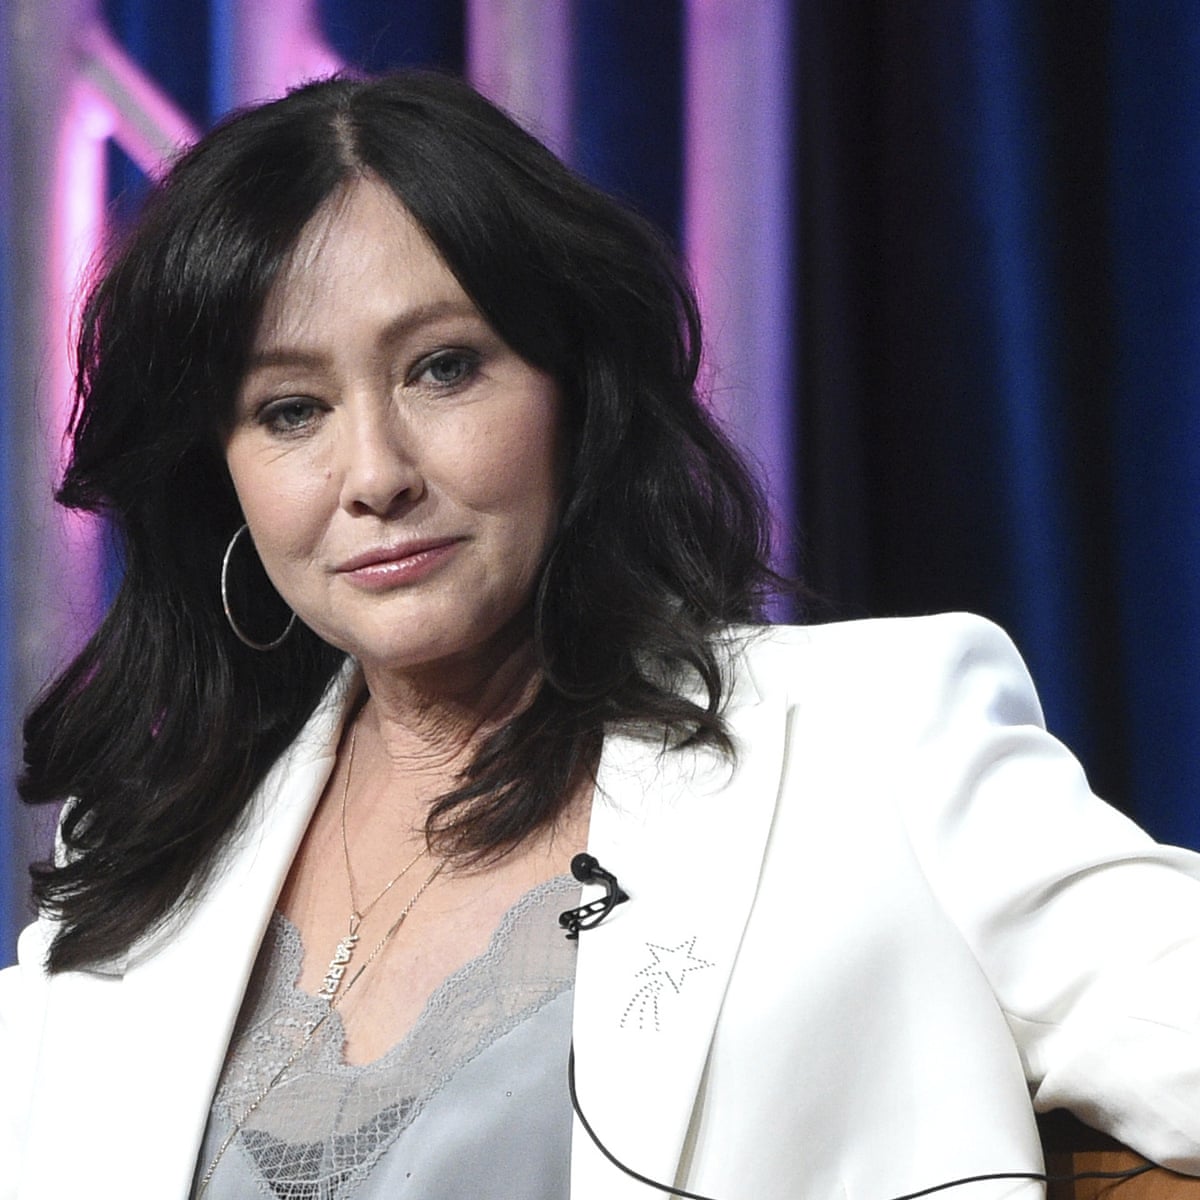 Shannen Doherty Reveals Terminal Cancer Amid Wildfire Insurance Battle Cali...